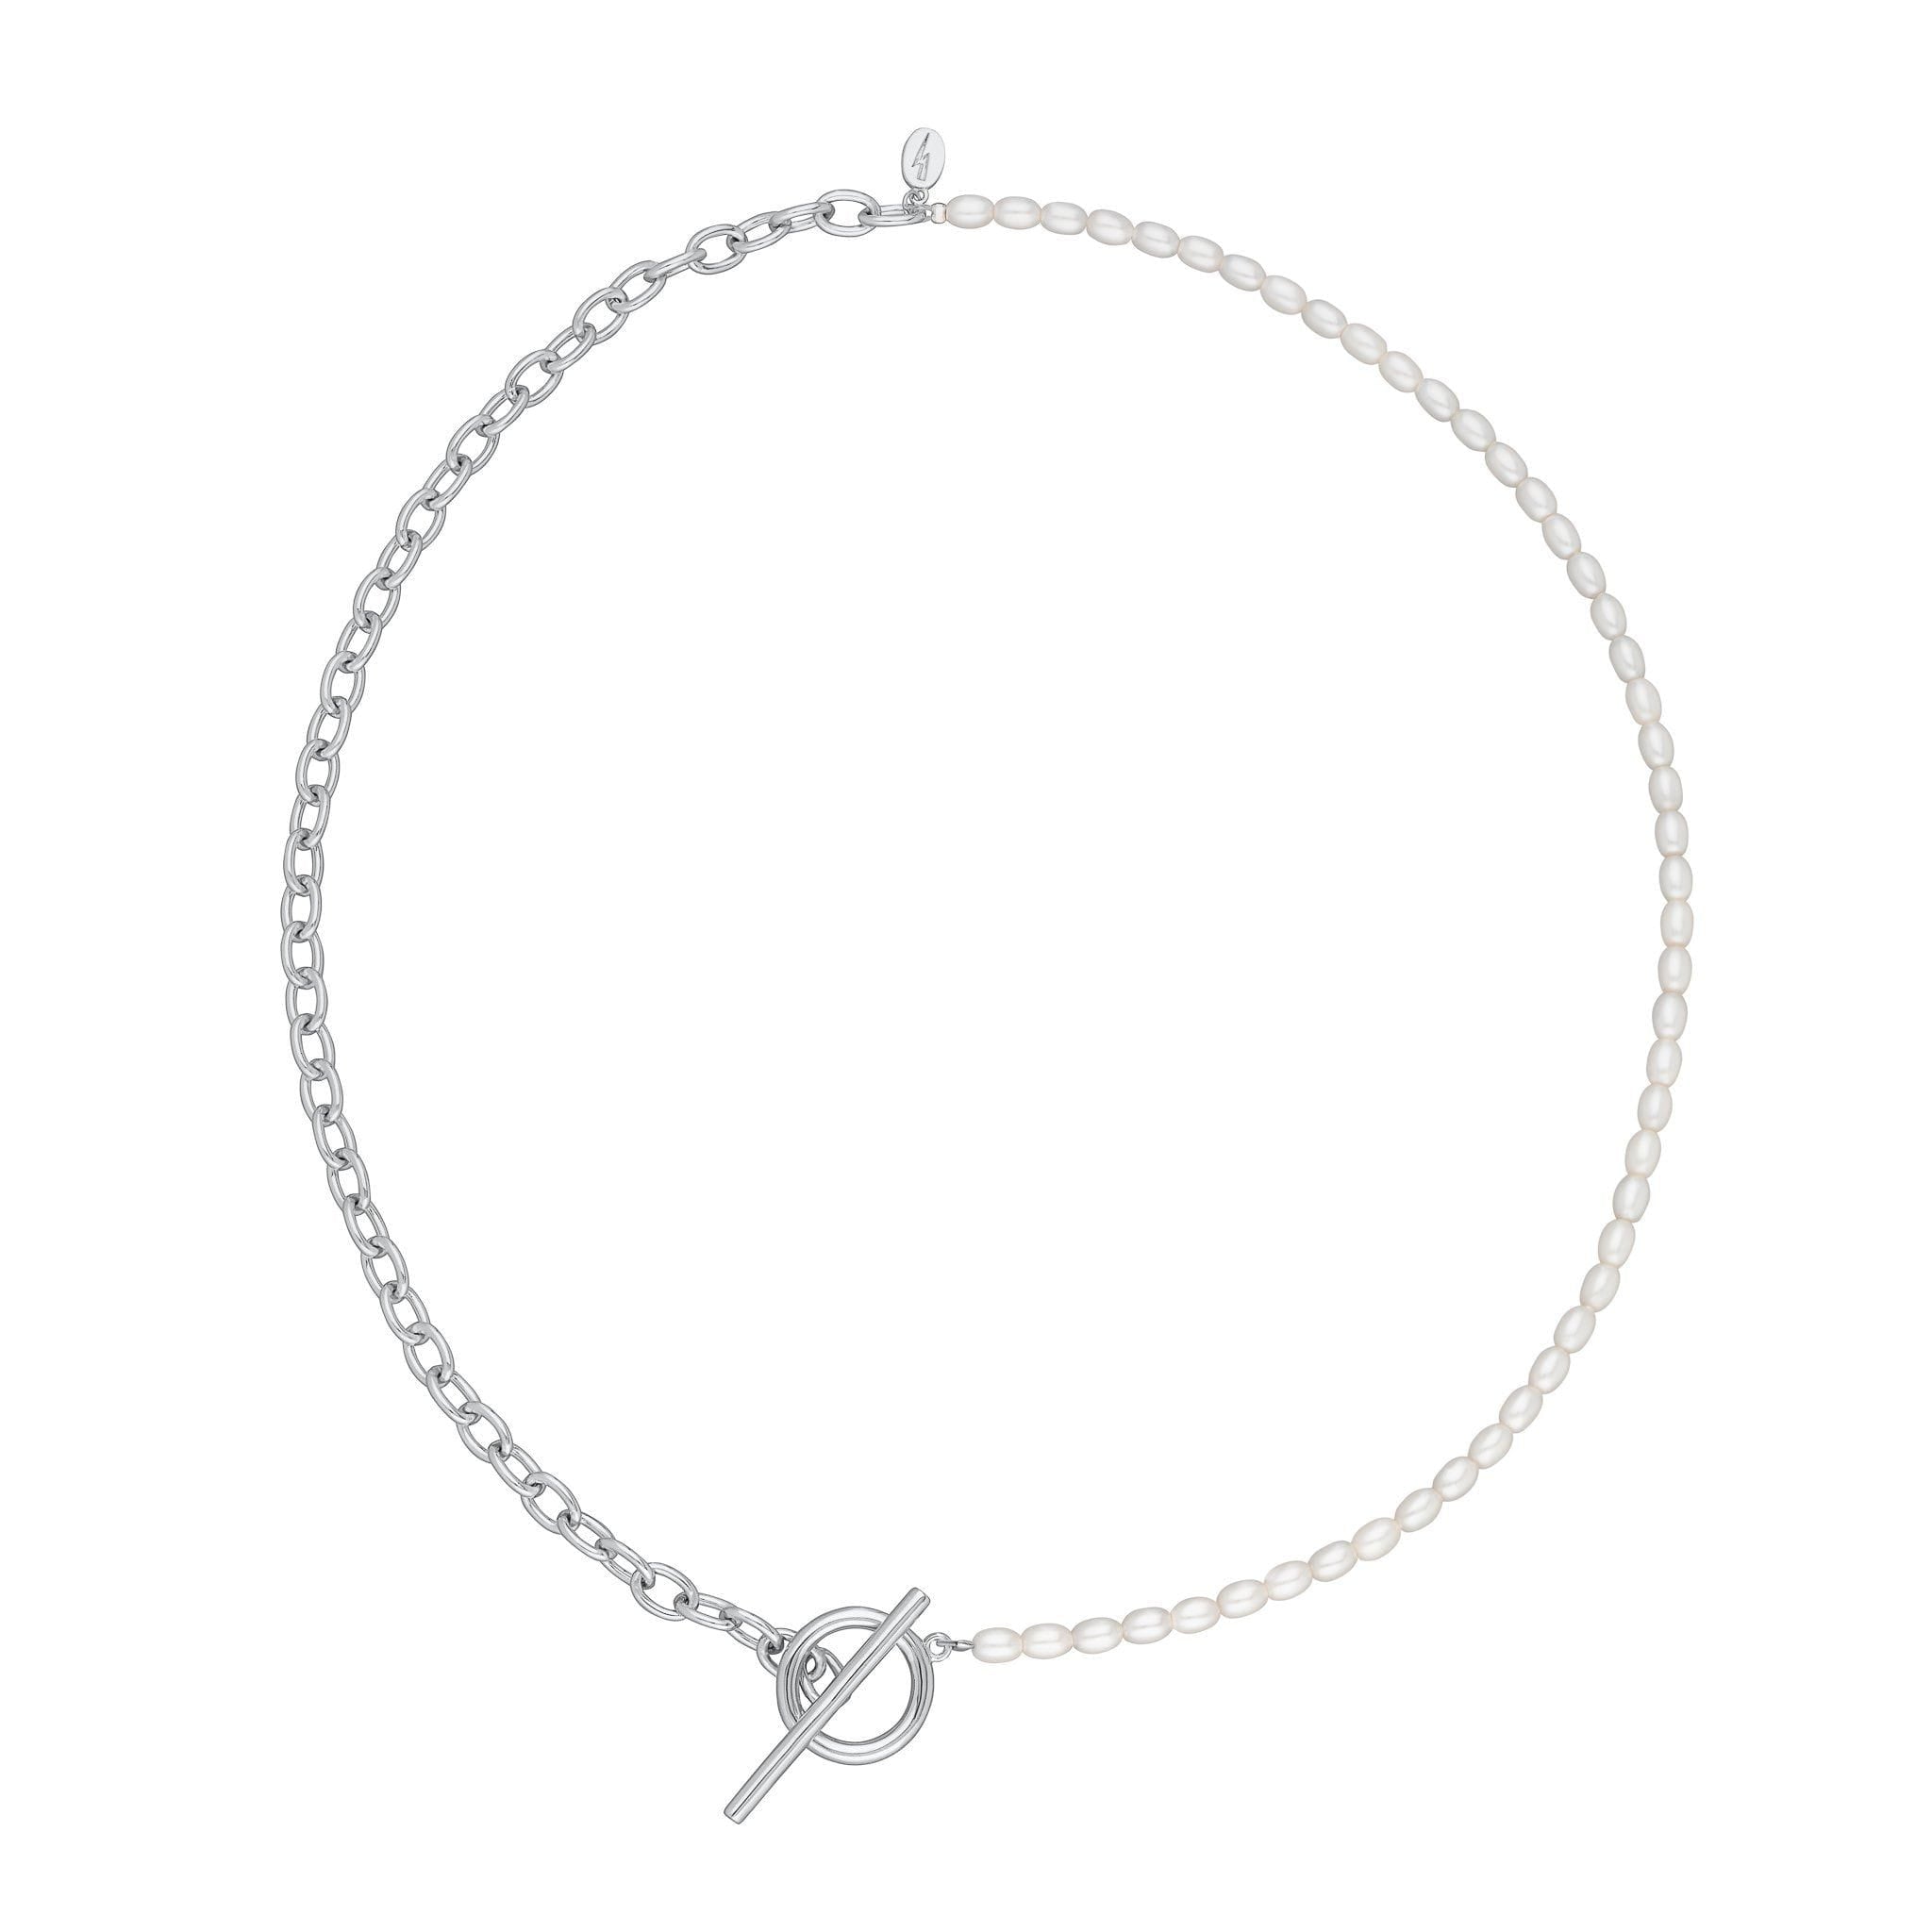  Hannah Martin Pearl and Chain T-Bar Necklace - by Scream Pretty